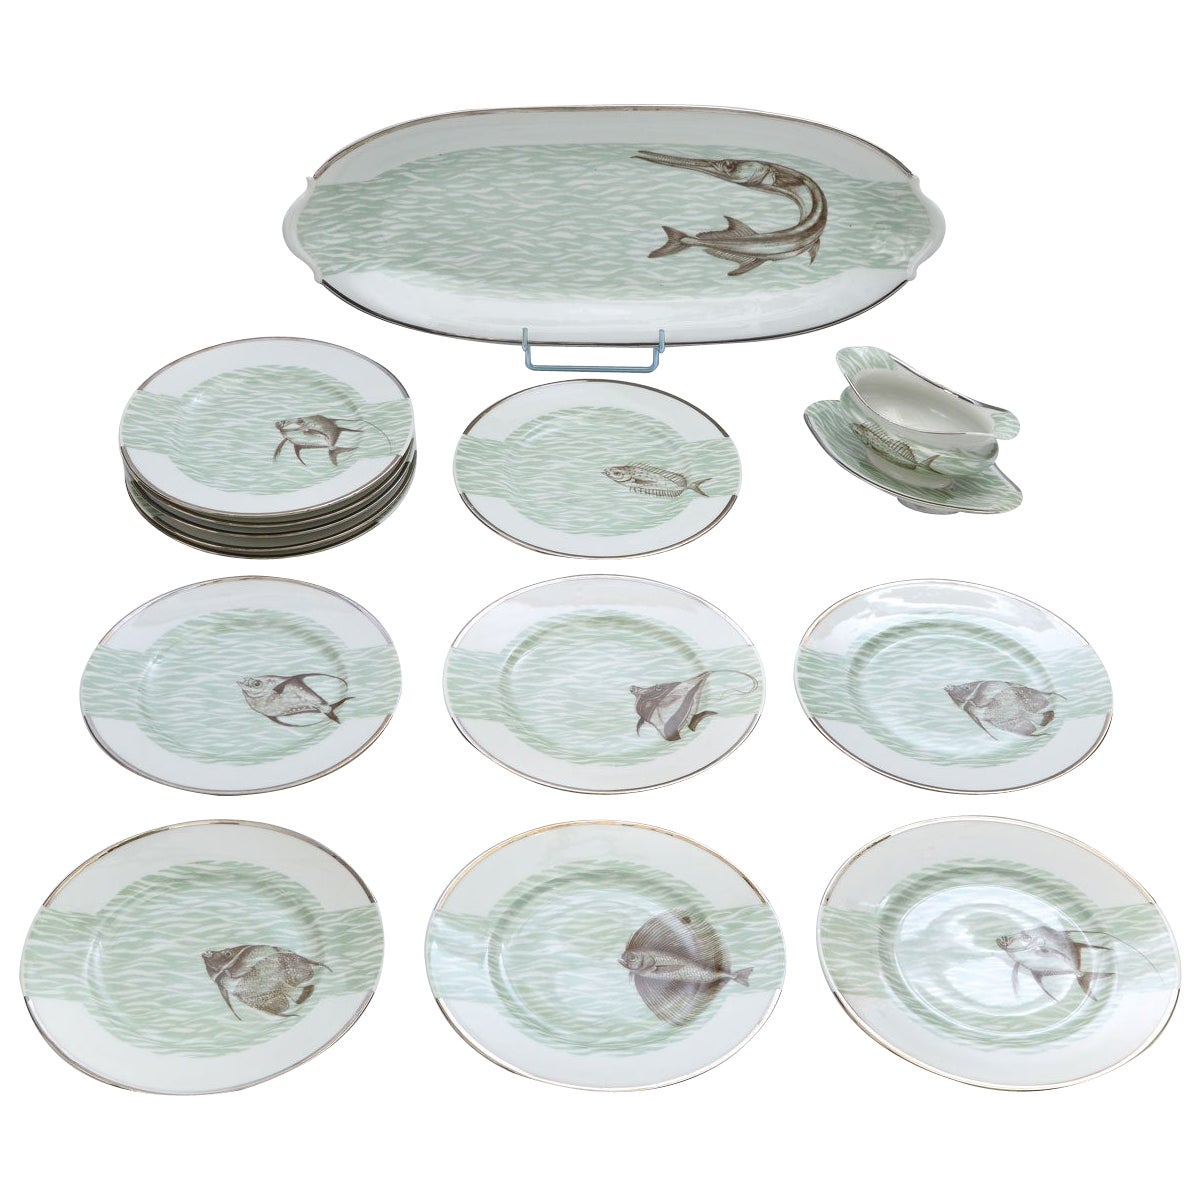 Art Deco style Fish Service for 12 People by Bernardaud Limoges  c. 1970 For Sale